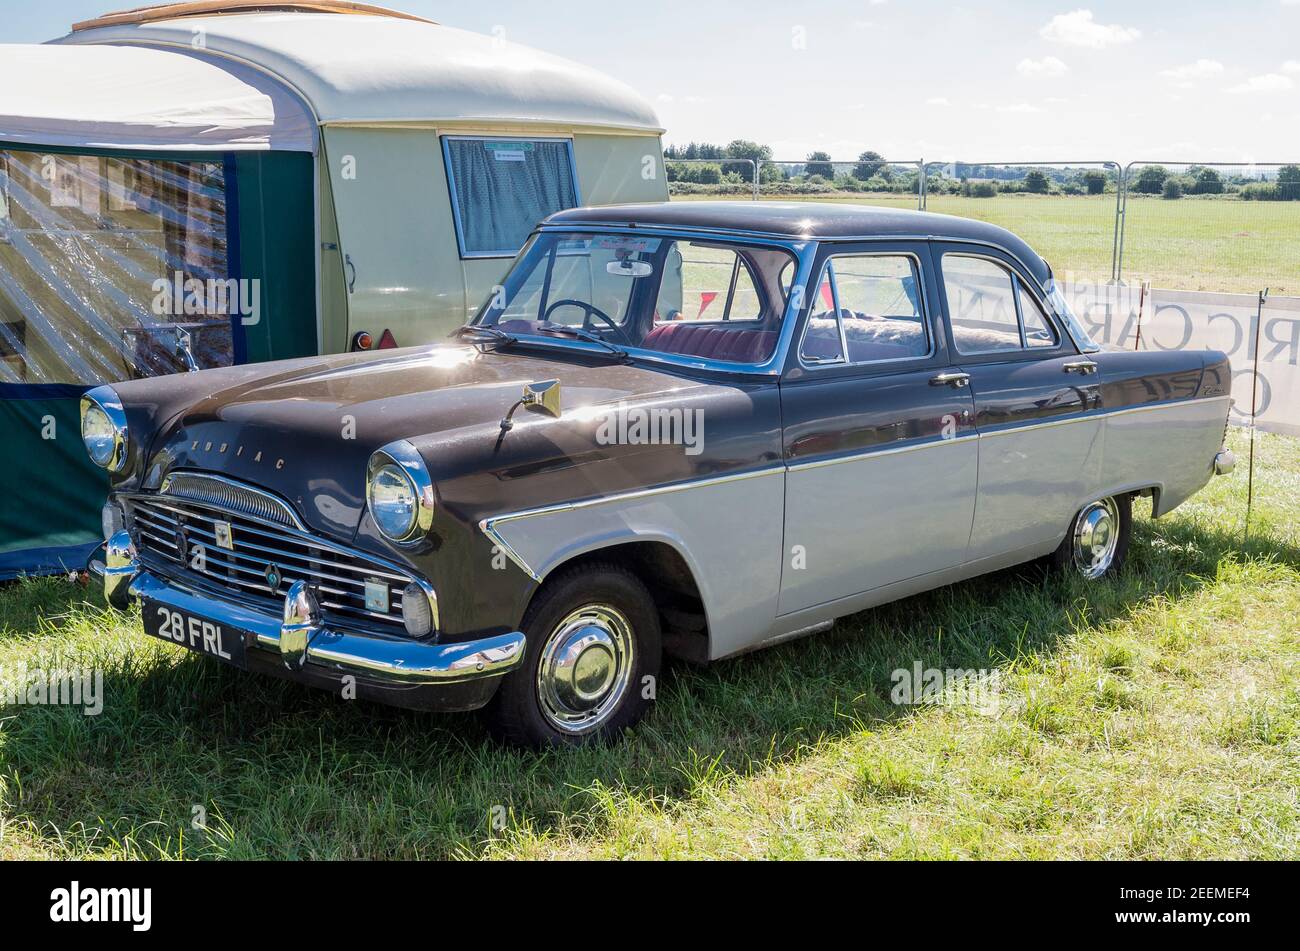 An old Ford Zodiac executive saloon restored and used for towing a small touring caravan to shows and events in the UK Stock Photo